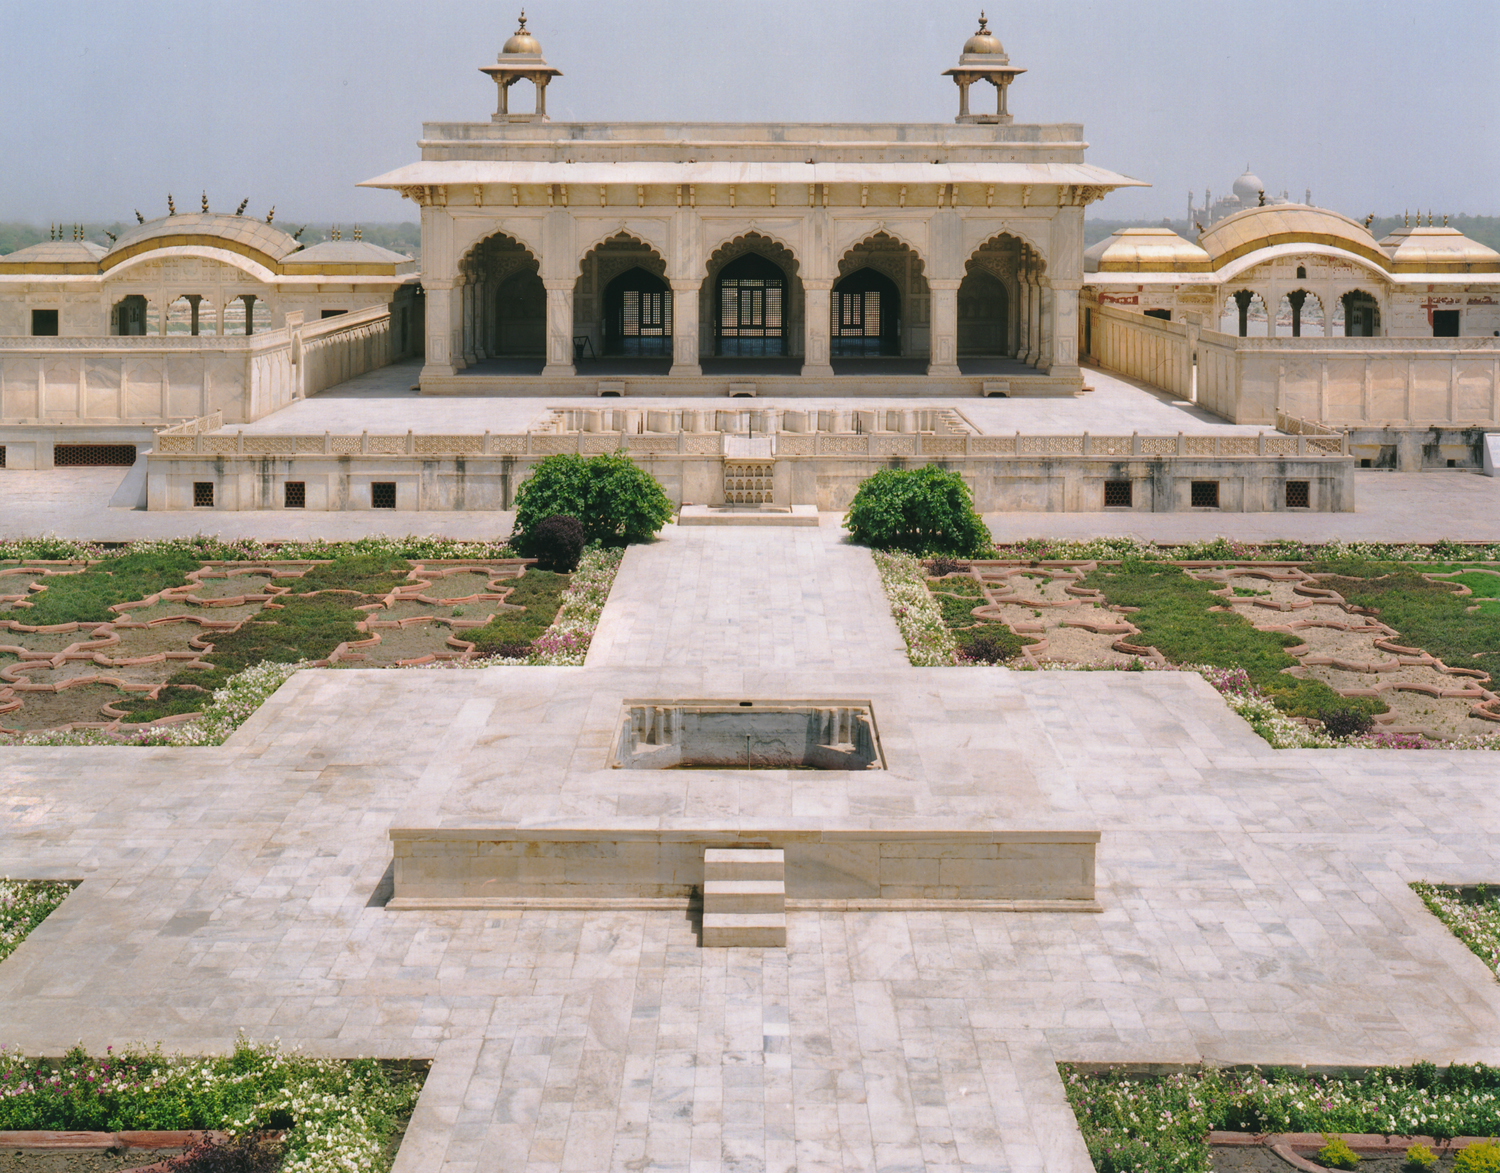 General view of the western elevation of the Khas Mahal within the Anguri Bagh, showing the elevated marble fountain preceding the palace structure